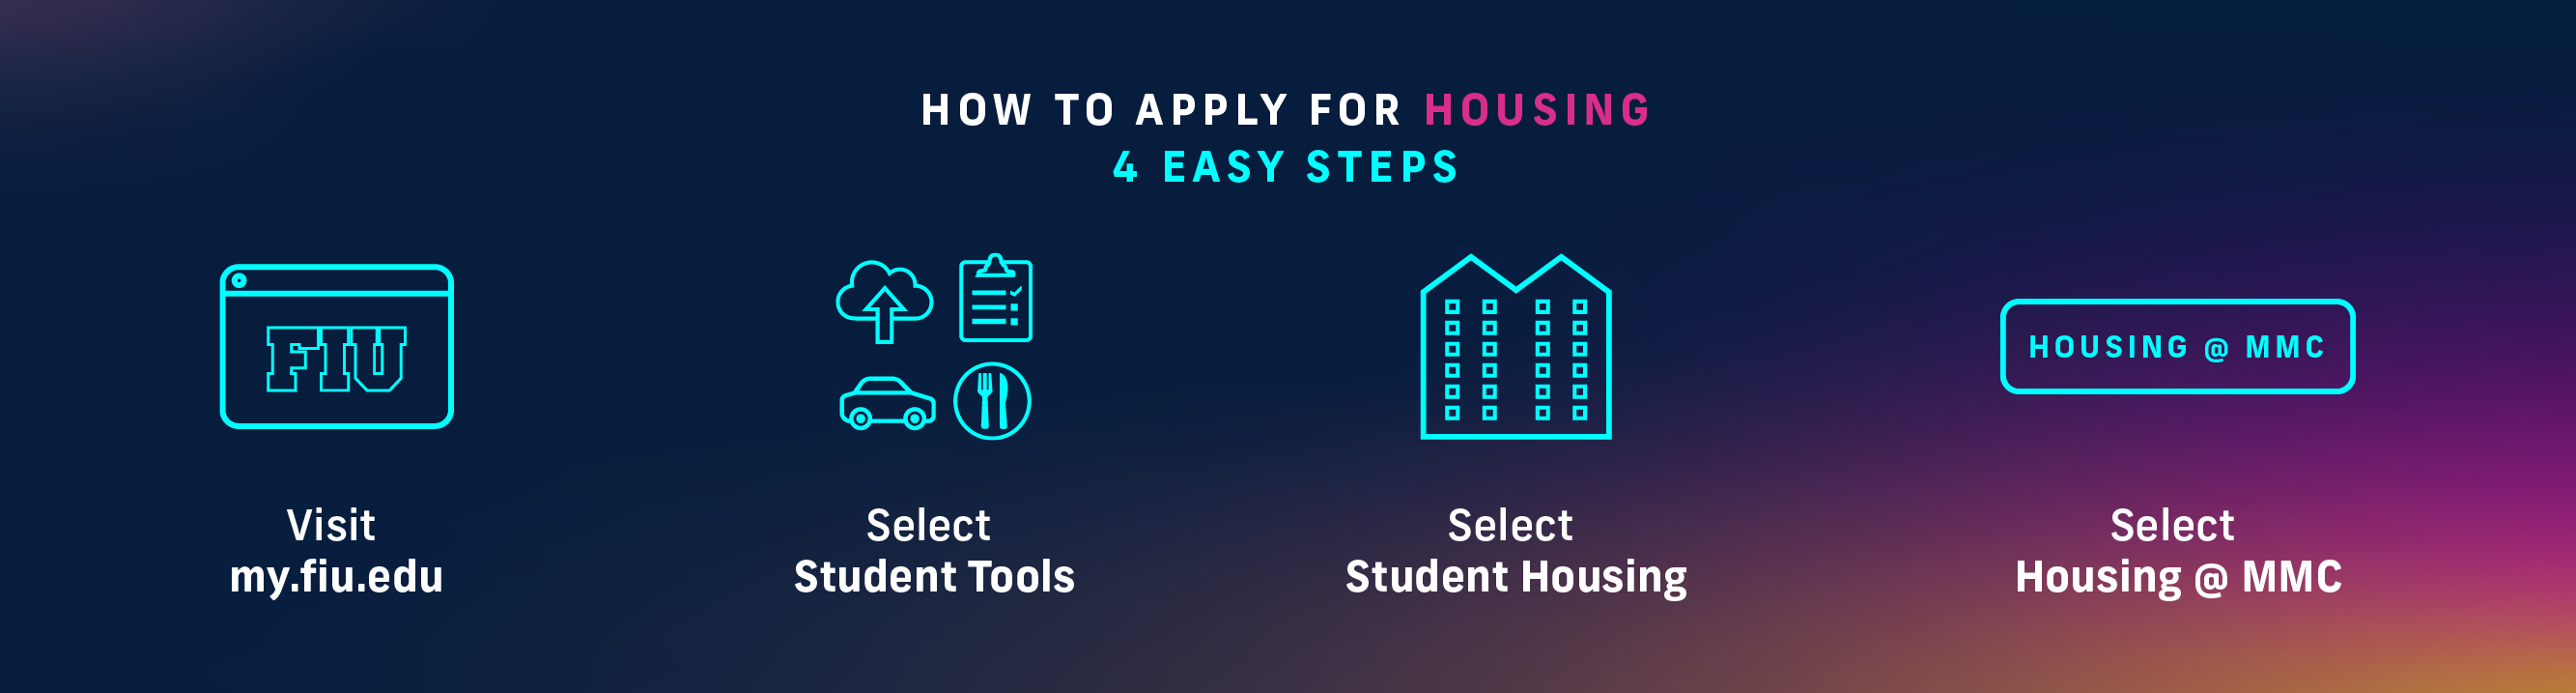 How to Apply for Housing 4 Easy Steps Select Student Tools Select Student Housing Select Housing @ MMC